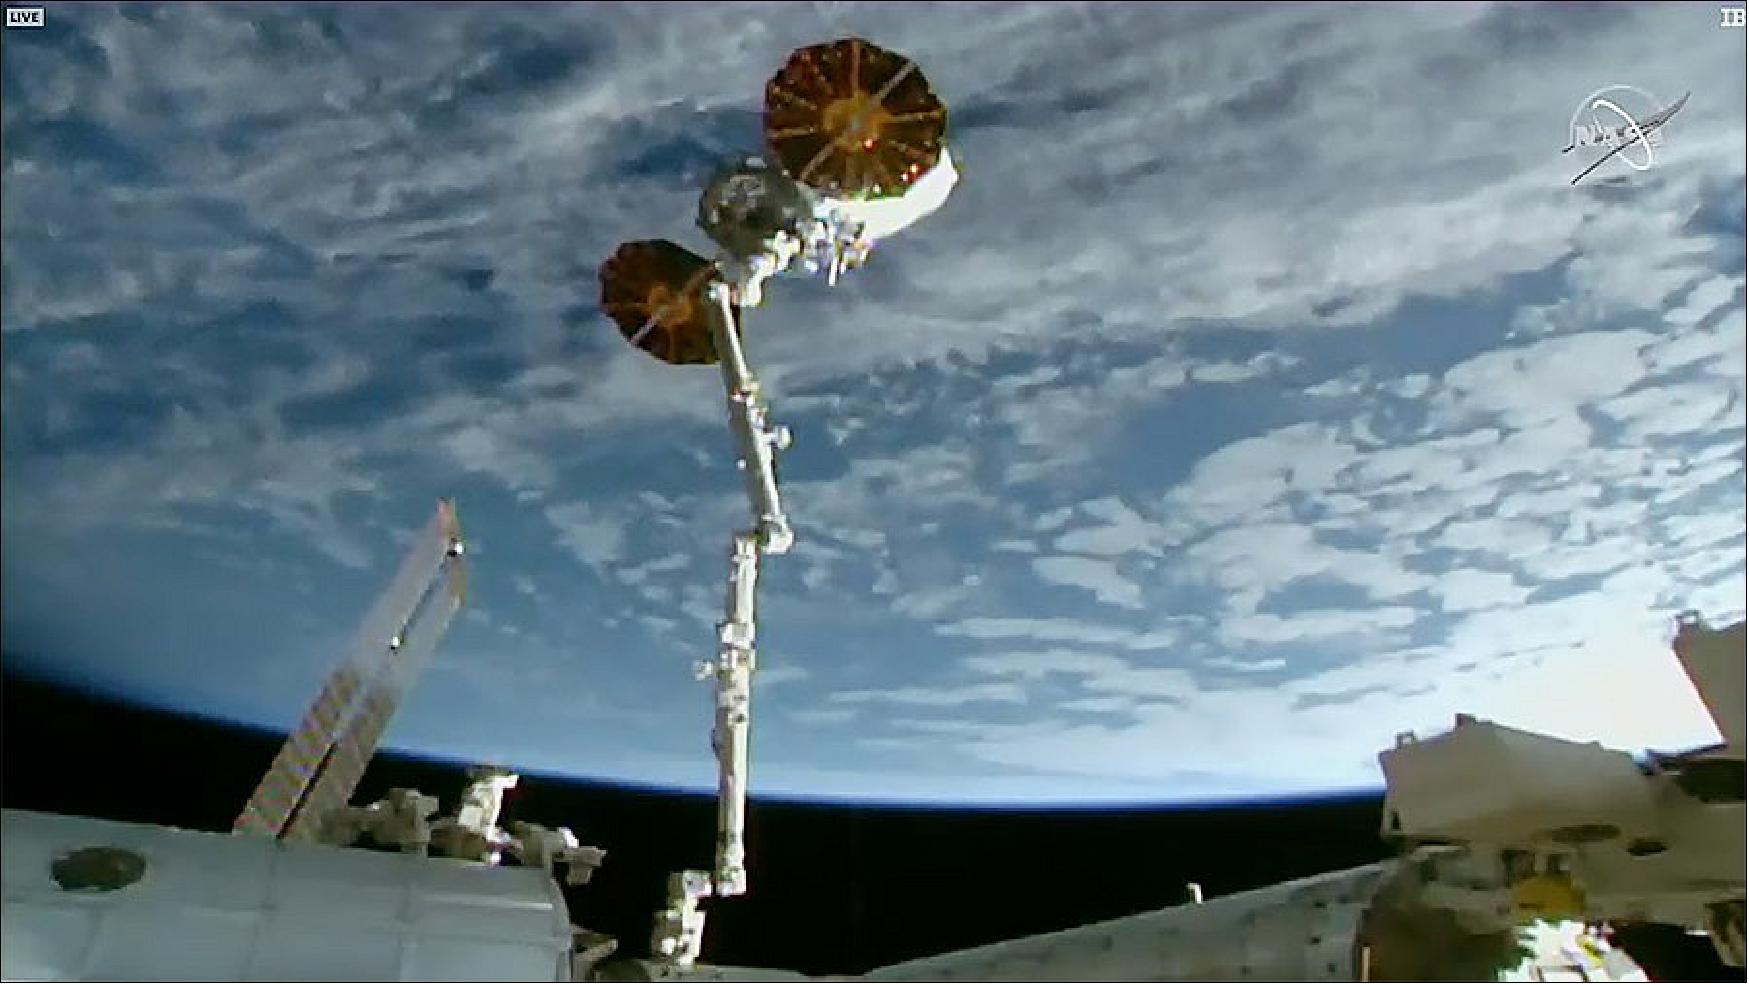 Figure 5: The Northrop Grumman Cygnus space freighter is in the grip of the Canadarm2 robotic arm moments before its release above the South Pacific Ocean (image credit: NASA TV)